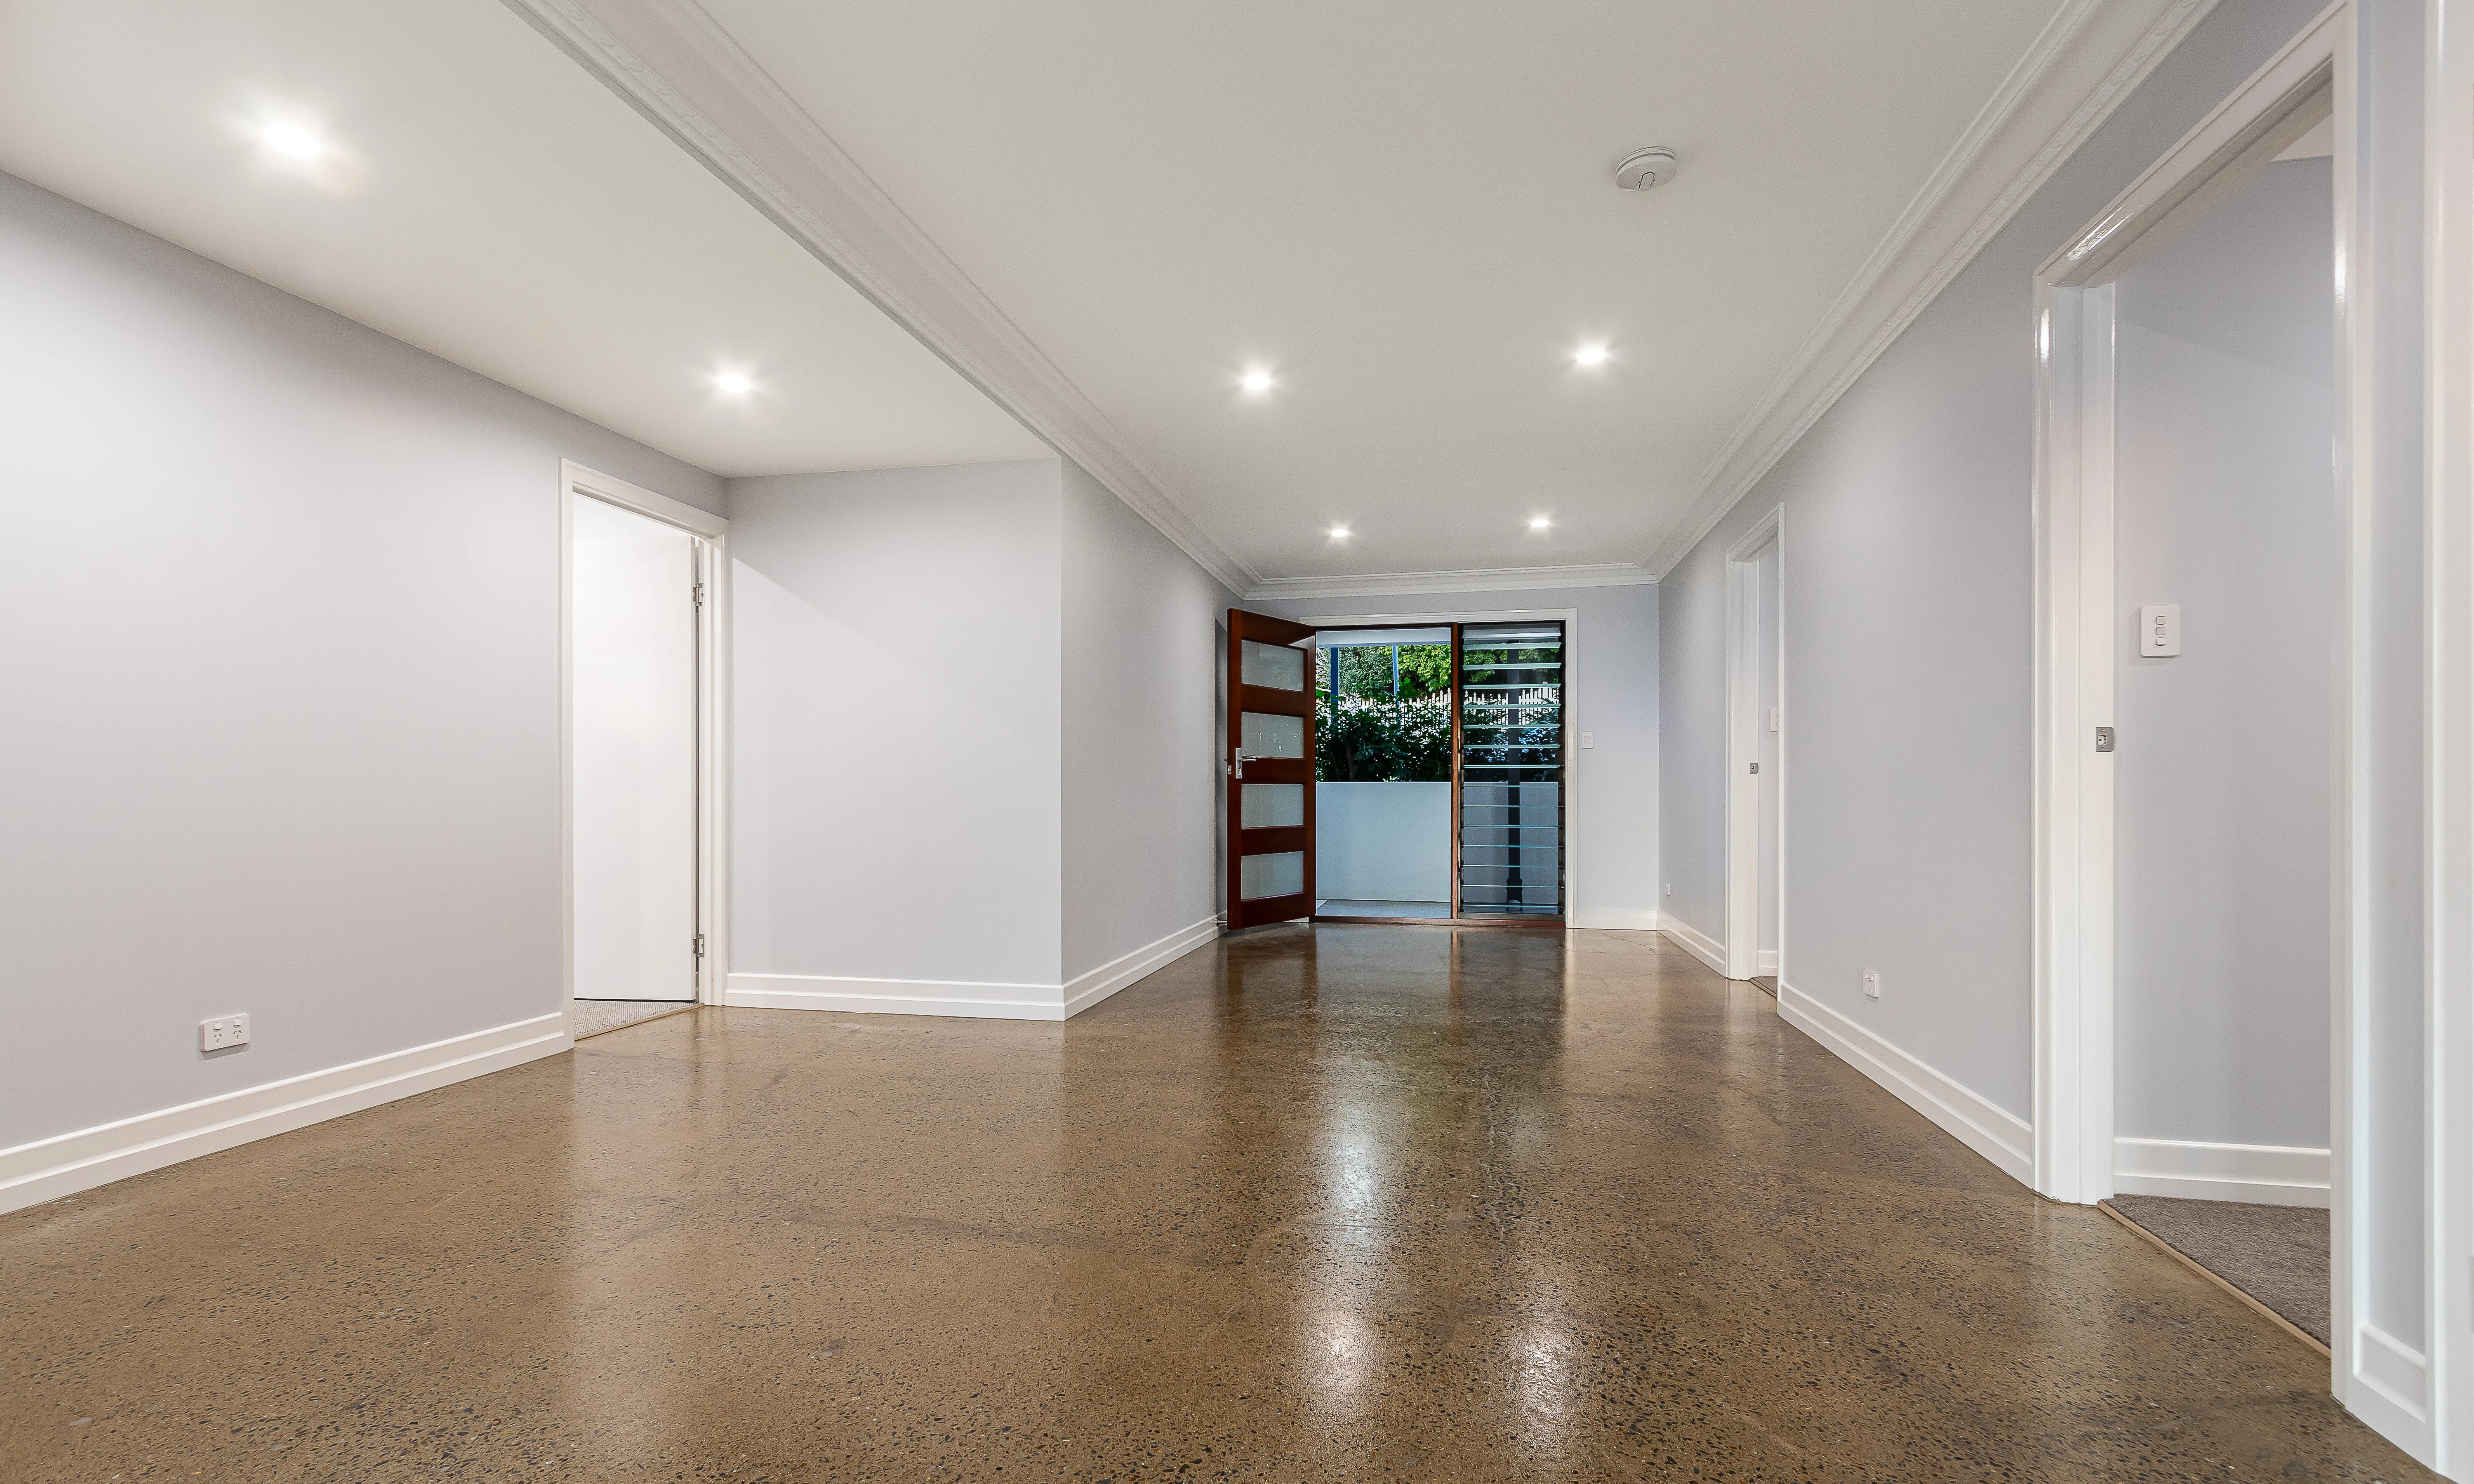 Entry door and Polished Concrete